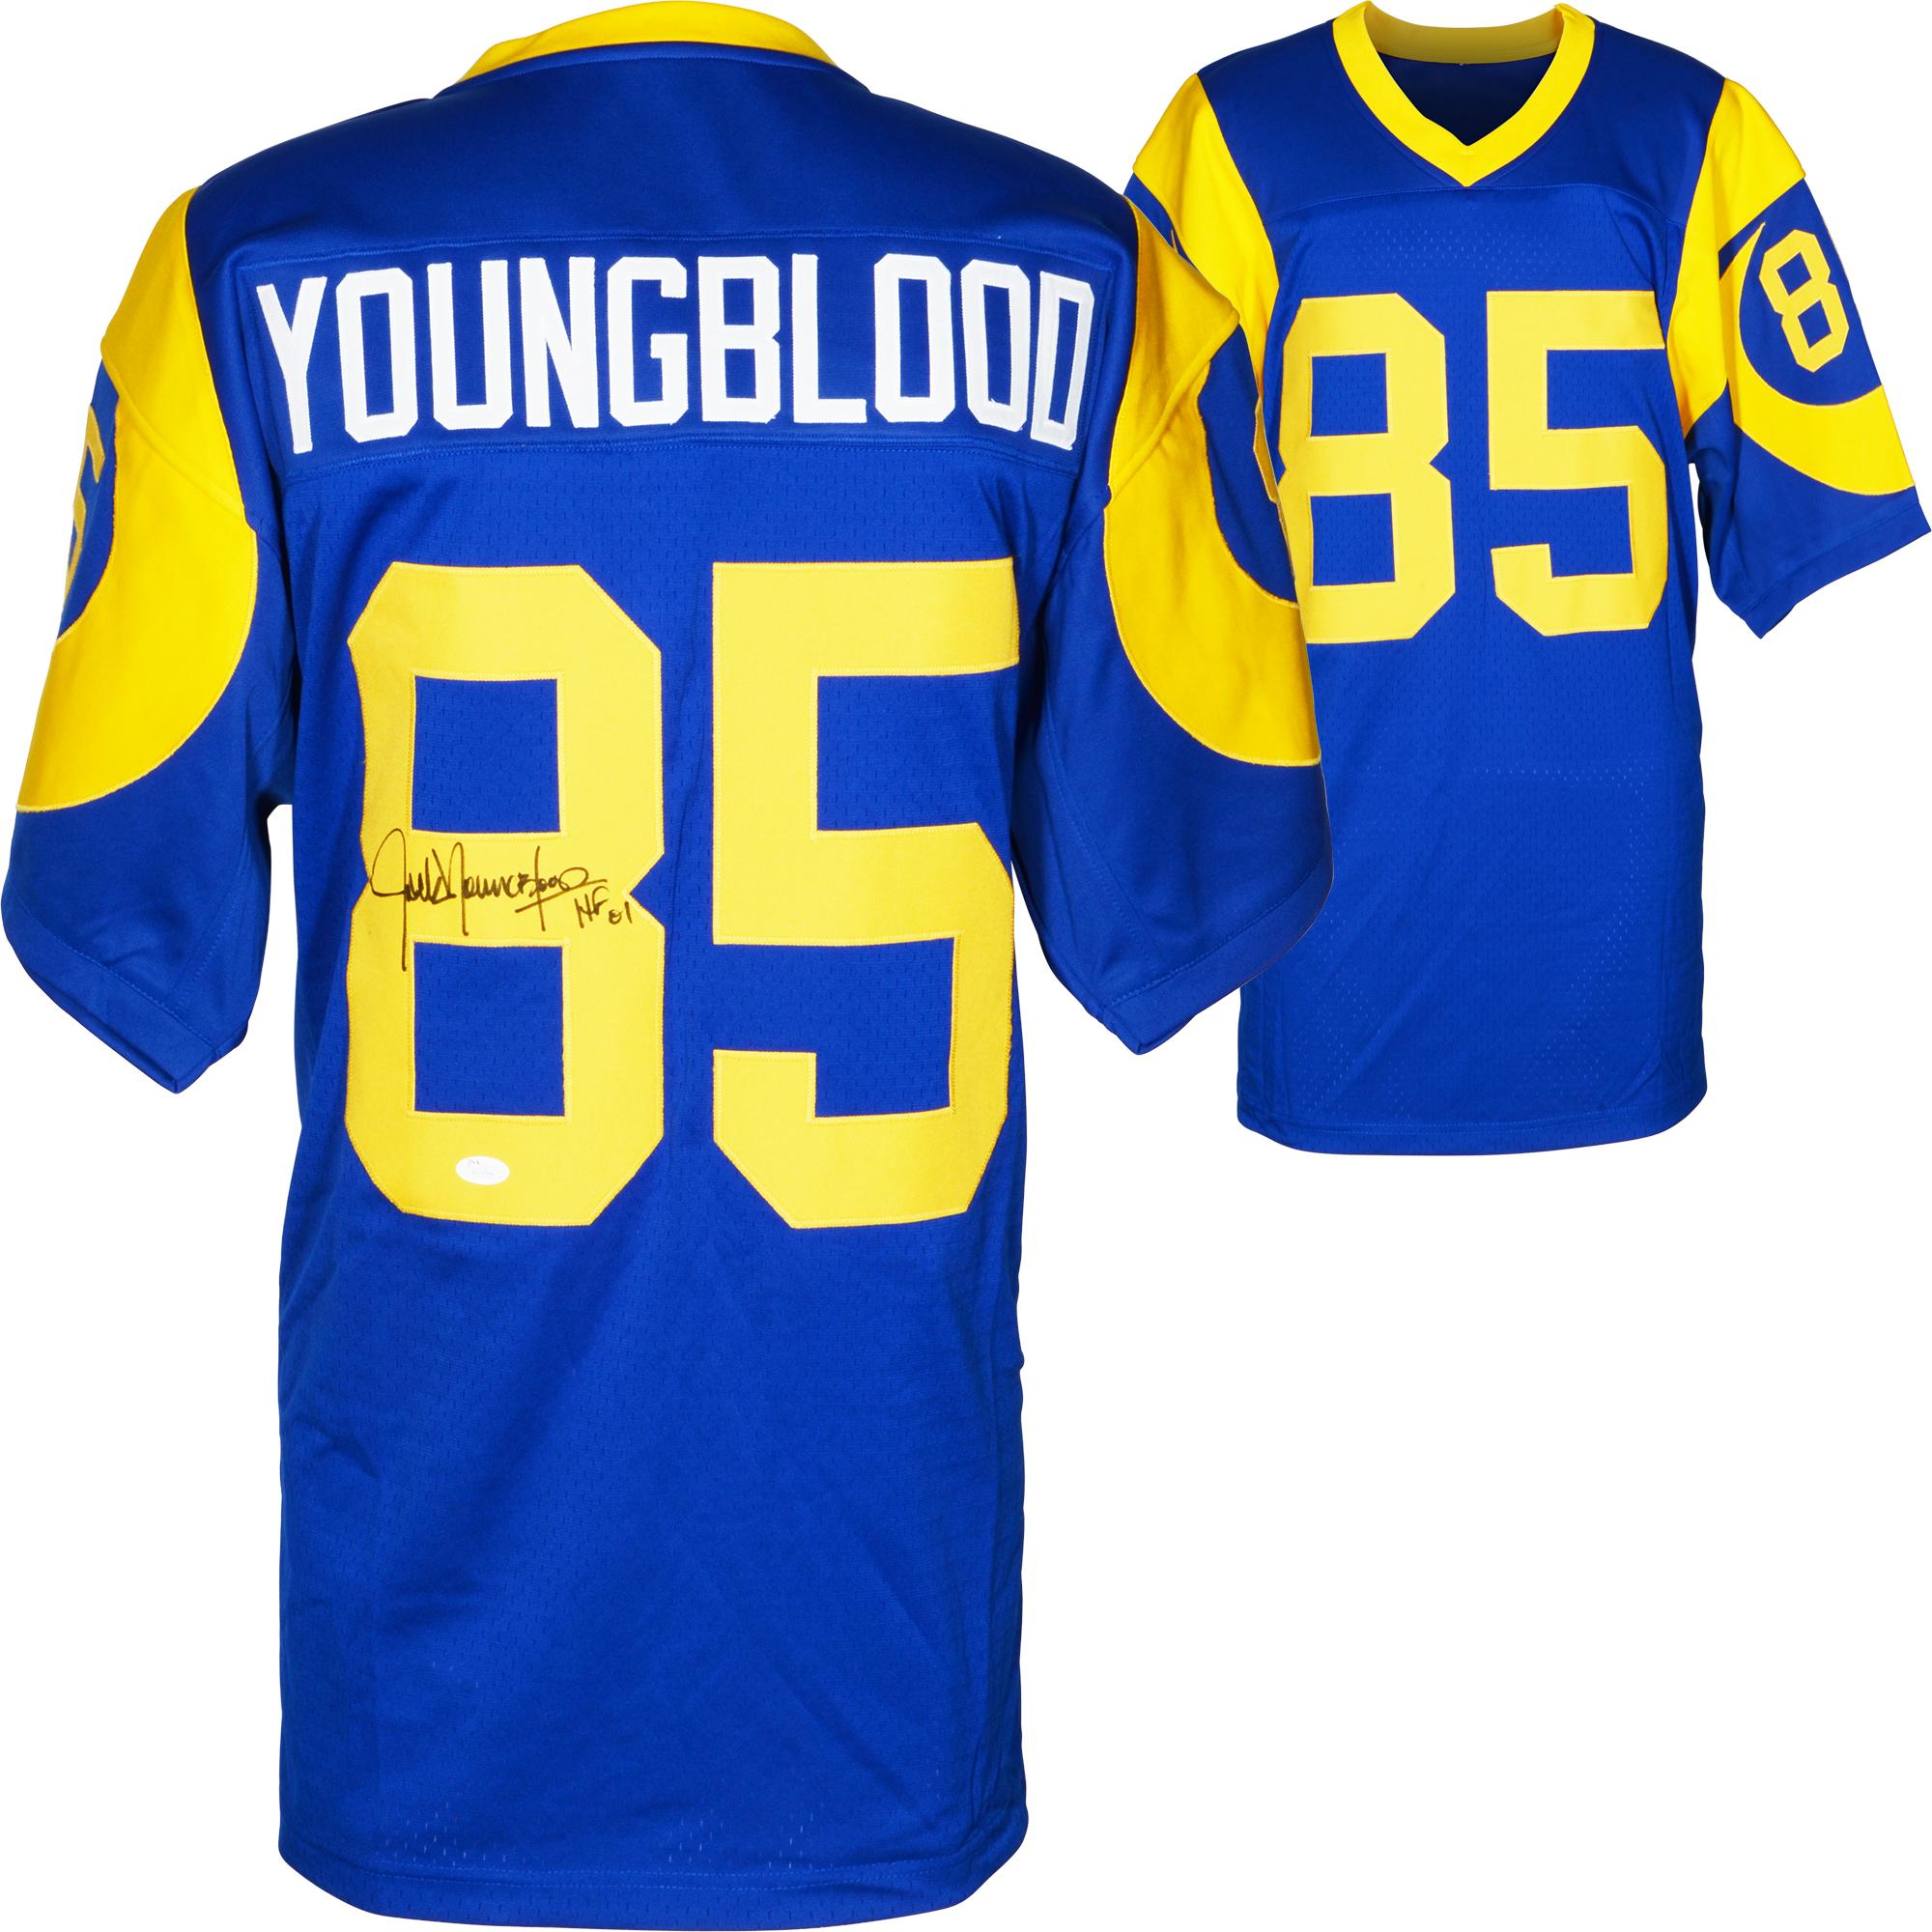 Happy 65th Birthday Jack Youngblood! Youngblood was inducted into the in 2001. 